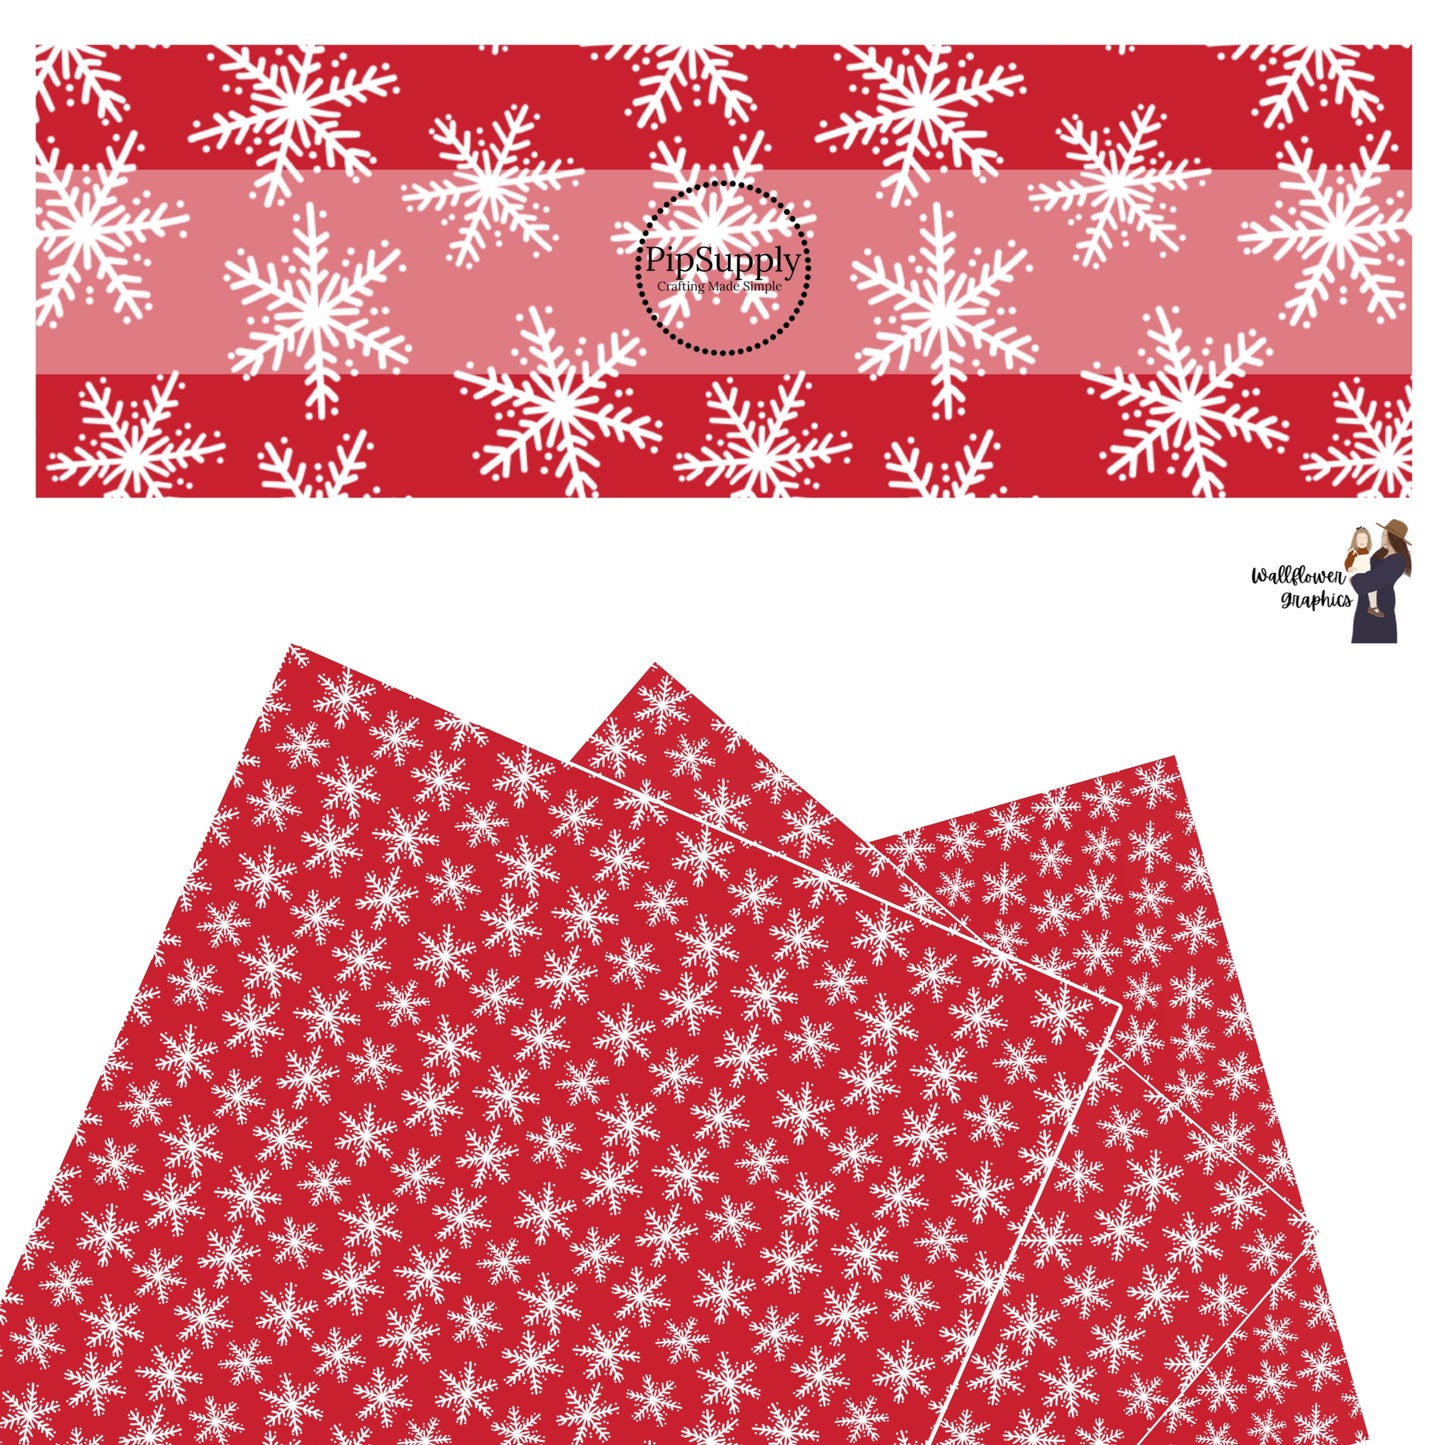 White snowflakes scattered on red faux leather sheets